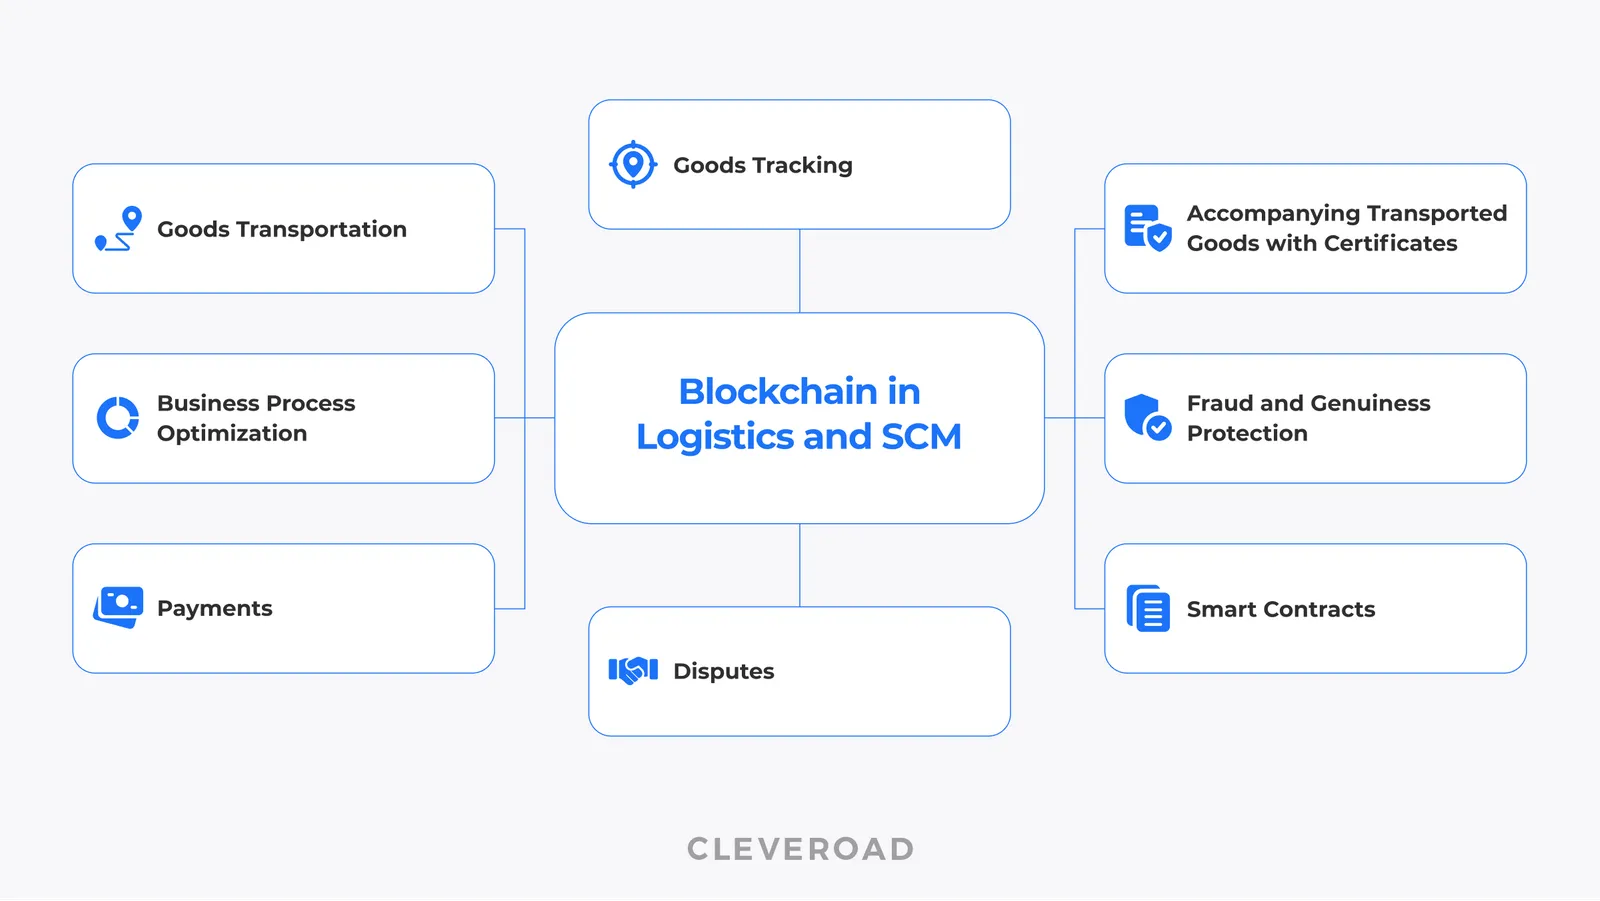 Usage of Blockchain in Logistics and SCM